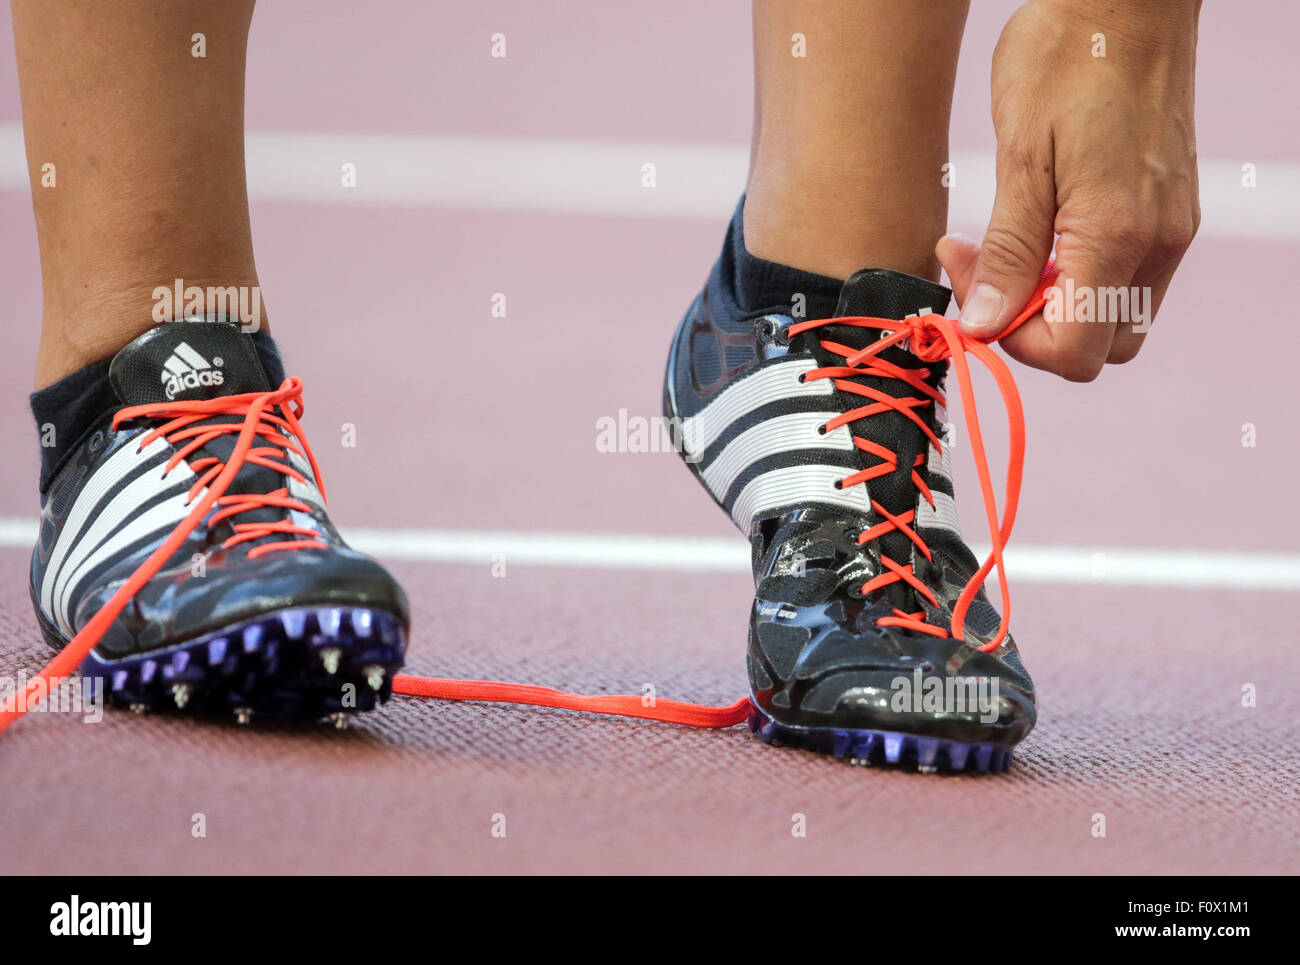 Beijing, China. 22nd Aug, 2015. Germany's Jennifer Oeser takes off her shoes after the 100 m hurdles segment of the heptathlon competition at the 15th International Association of Athletics Federations (IAAF) Athletics World Championships at the National stadium, known as Bird's Nest, in Beijing, China, 22 August 2015. Photo: Michael Kappeler/dpa/Alamy Live News Stock Photo